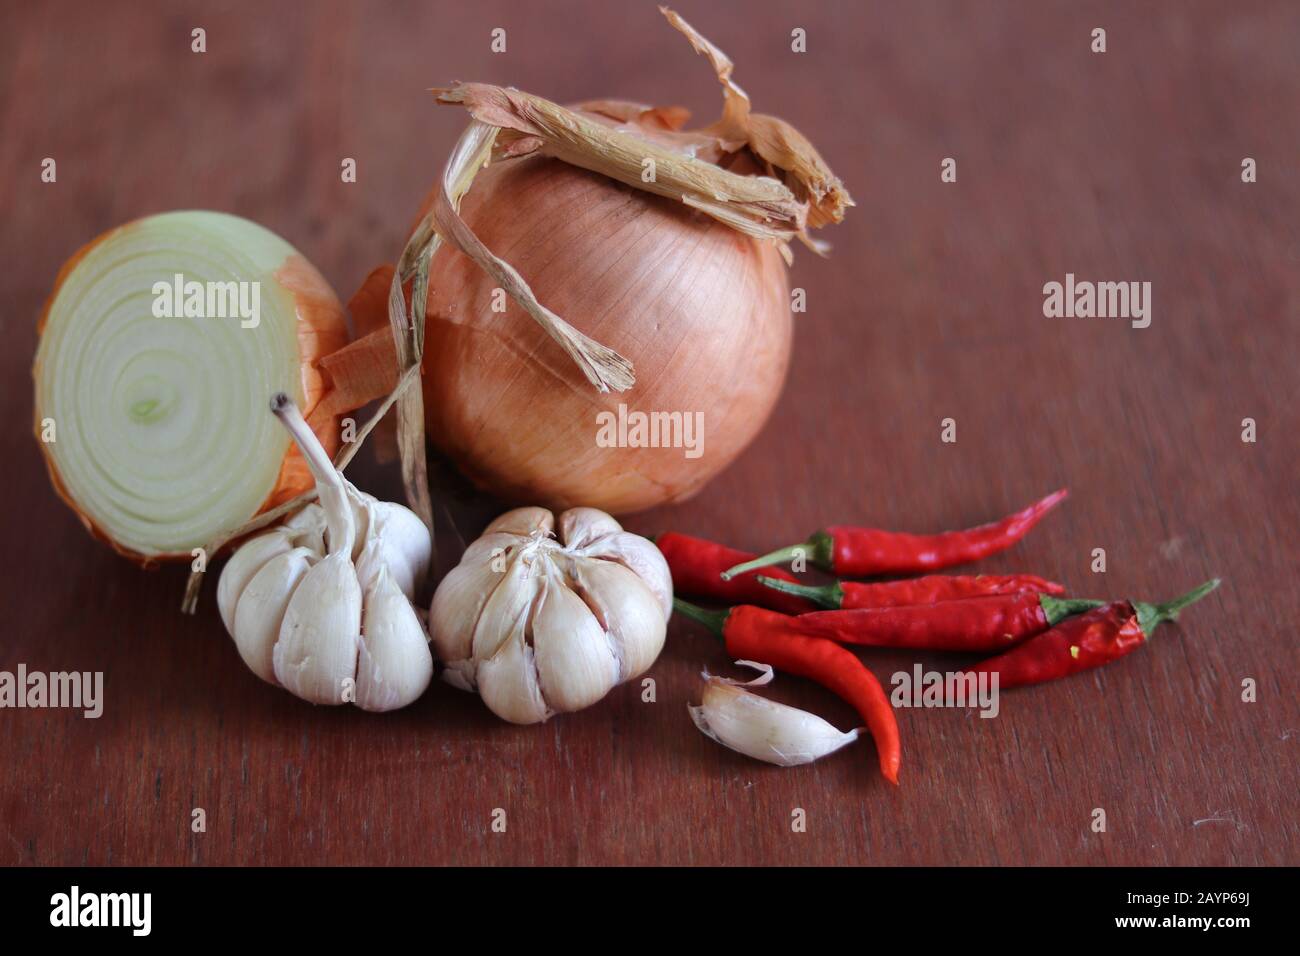 Onion, garlic and red chilies against a wooden background to show concept of gastronomy, cuisine, and food industry Stock Photo